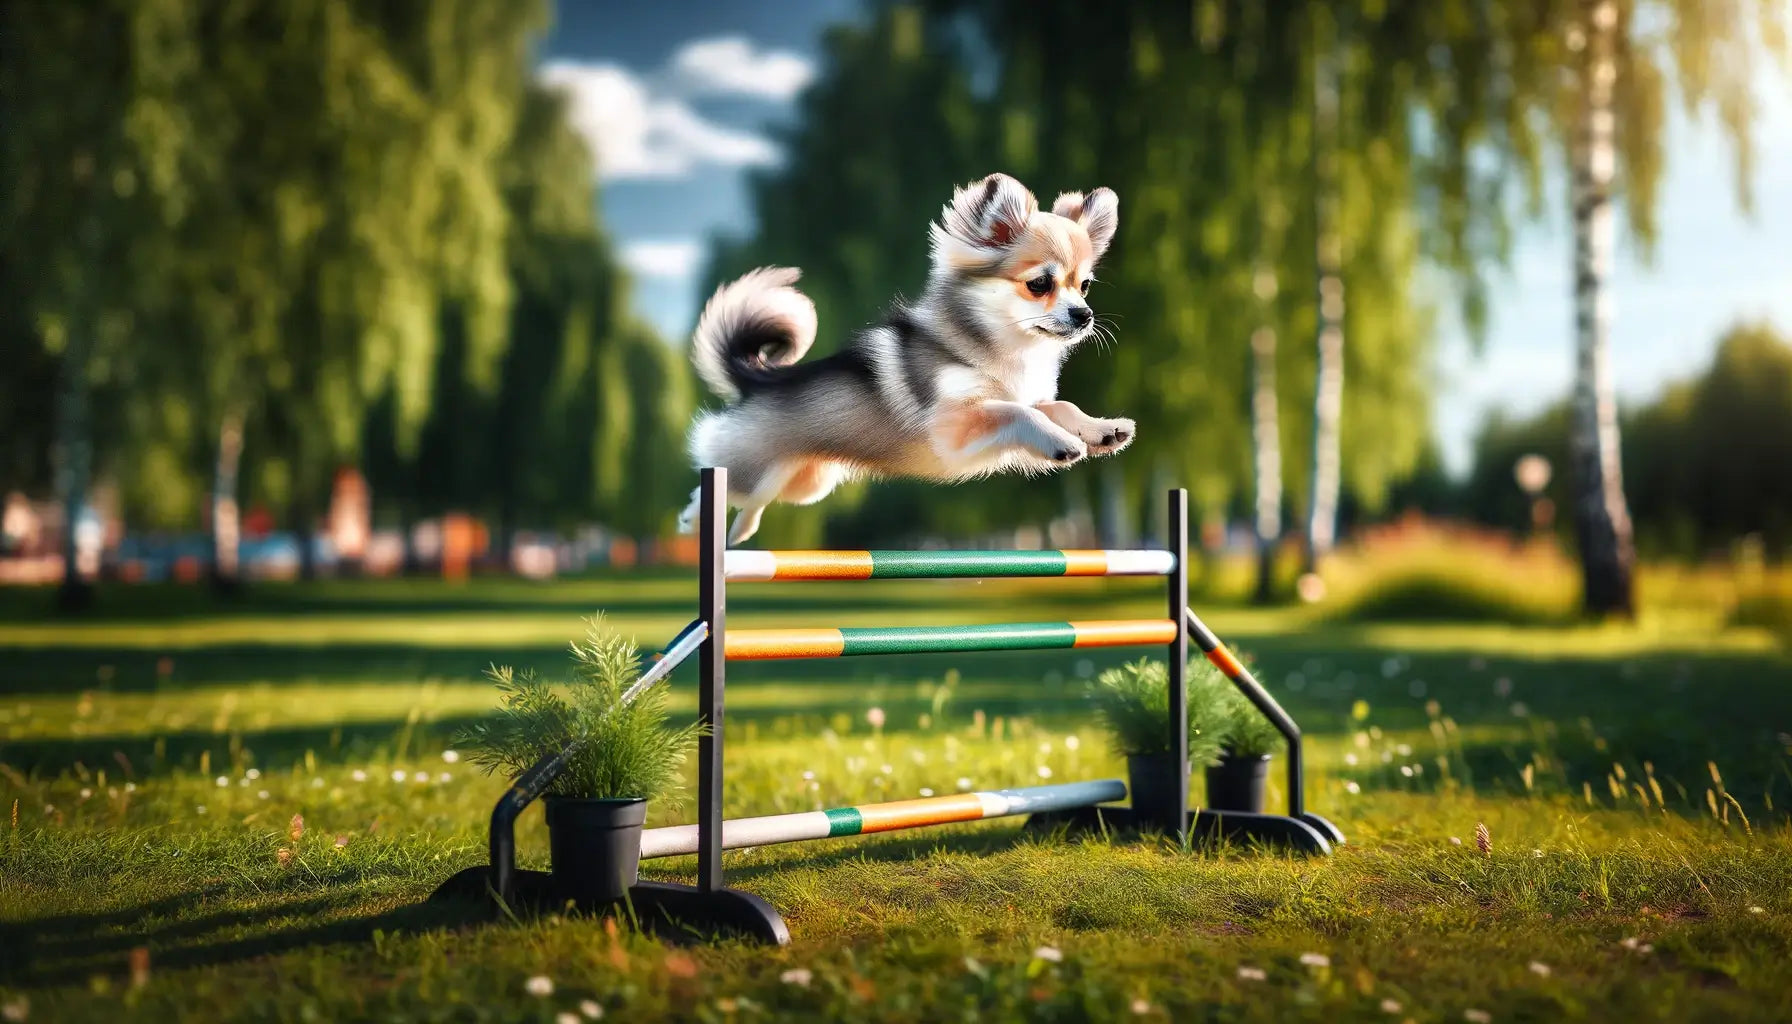 A Chihuahua Husky Mix leaping over a hurdle in a park setting, capturing the essence of agility and outdoor enjoyment.